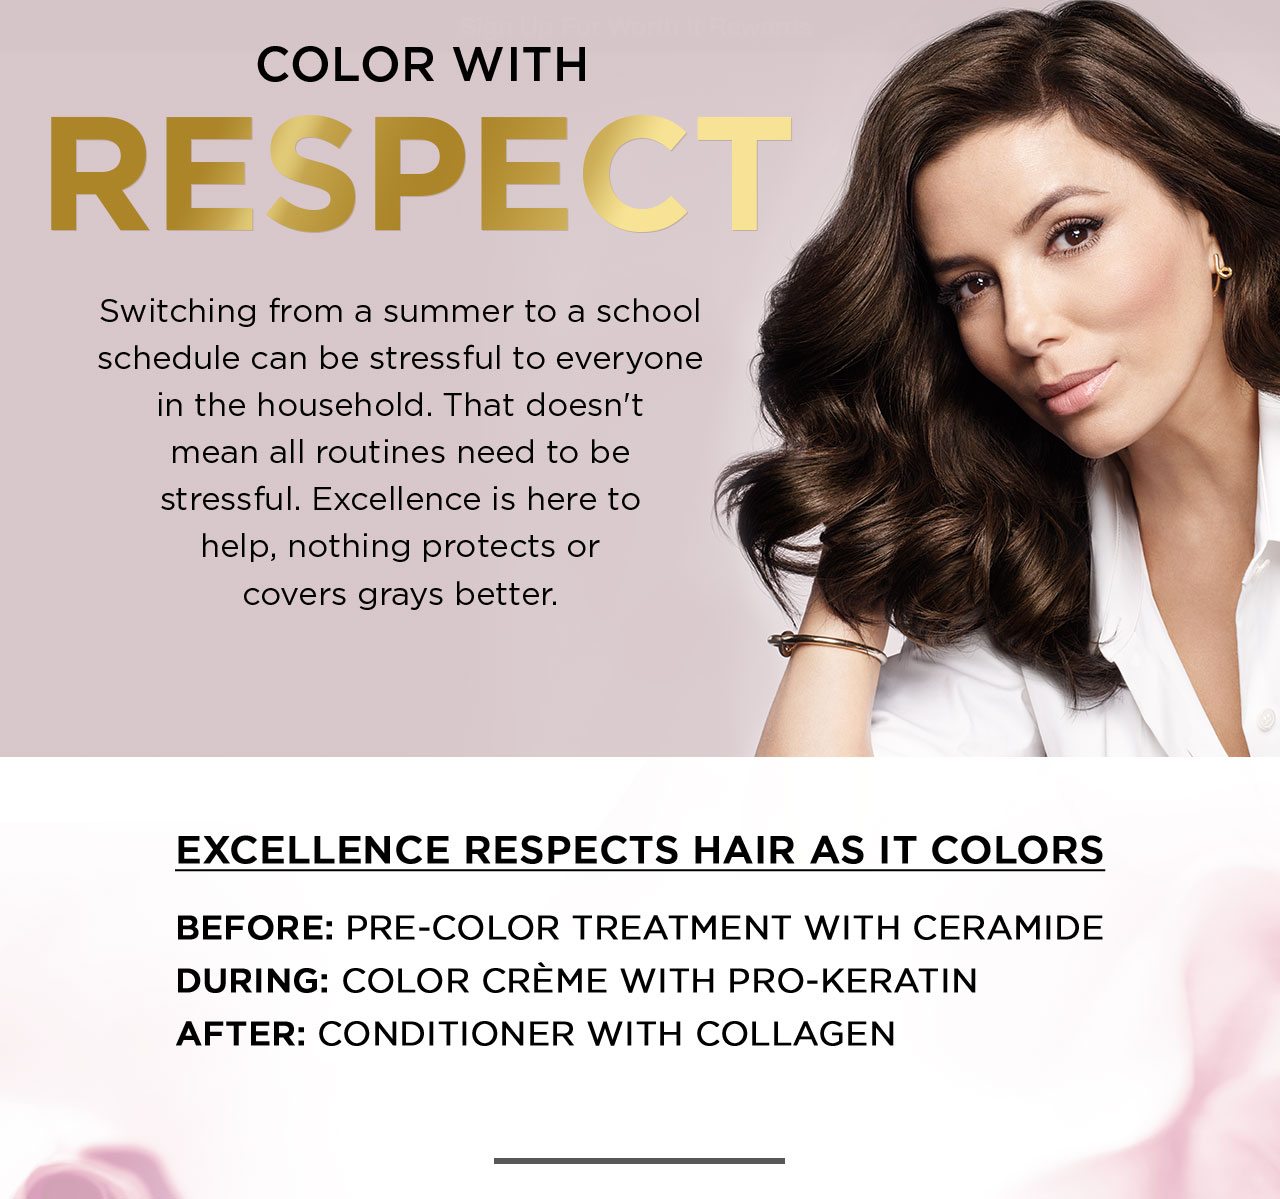 COLOR WITH RESPECT - Switching from a summer to a school schedule can be stressful to everyone in the household. That doesn't mean all routines need to be stressful. Excellence is here to help, nothing protects or covers grays better. - EXCELLENCE RESPECTS HAIR AS IT COLORS - BEFORE: PRE-COLOR TREATMENT WITH CERAMIDE - DURING: COLOR CRÈME WITH PRO-KERATIN - AFTER: CONDITIONER WITH COLLAGEN